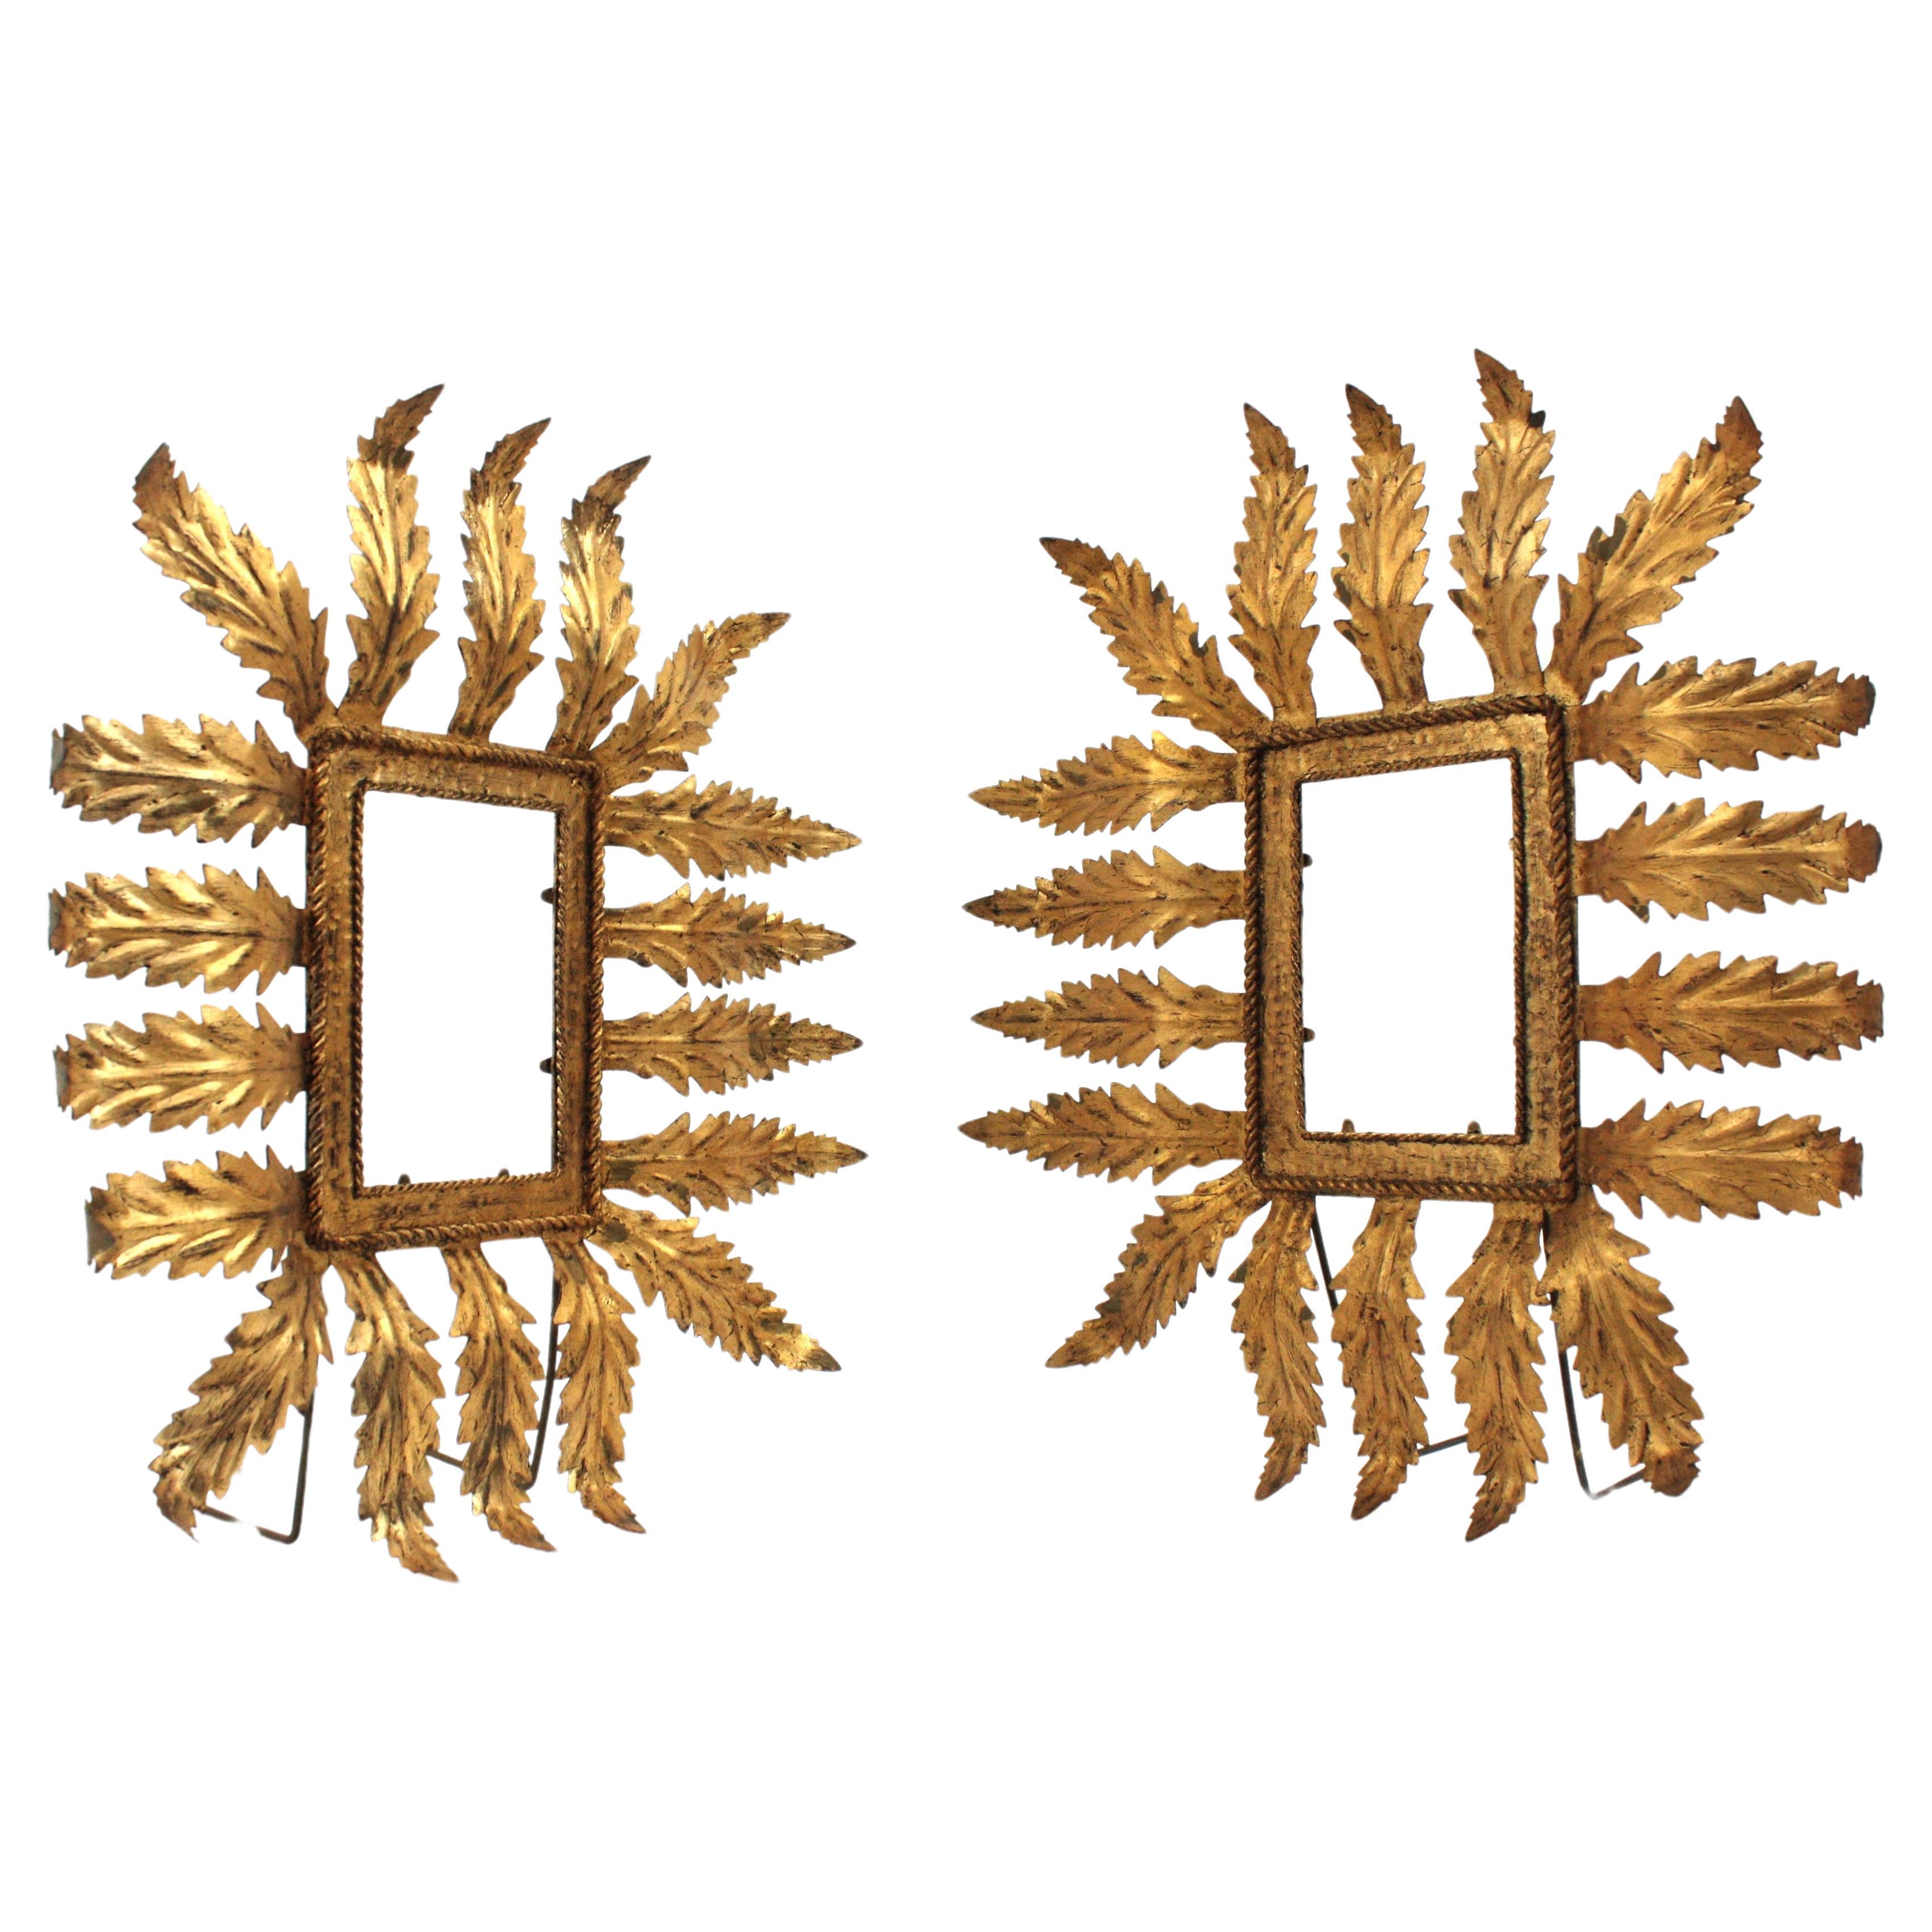 Sunburst Rectangular Tabletop Picture Frames in Gilt Metal, Spain, 1940s.
Pair of hand-hammered iron sunburst frames with leaves surrounding the picture and gold leaf finish
To be used vertically. Standing as easels. No glass.
Original gold leaf